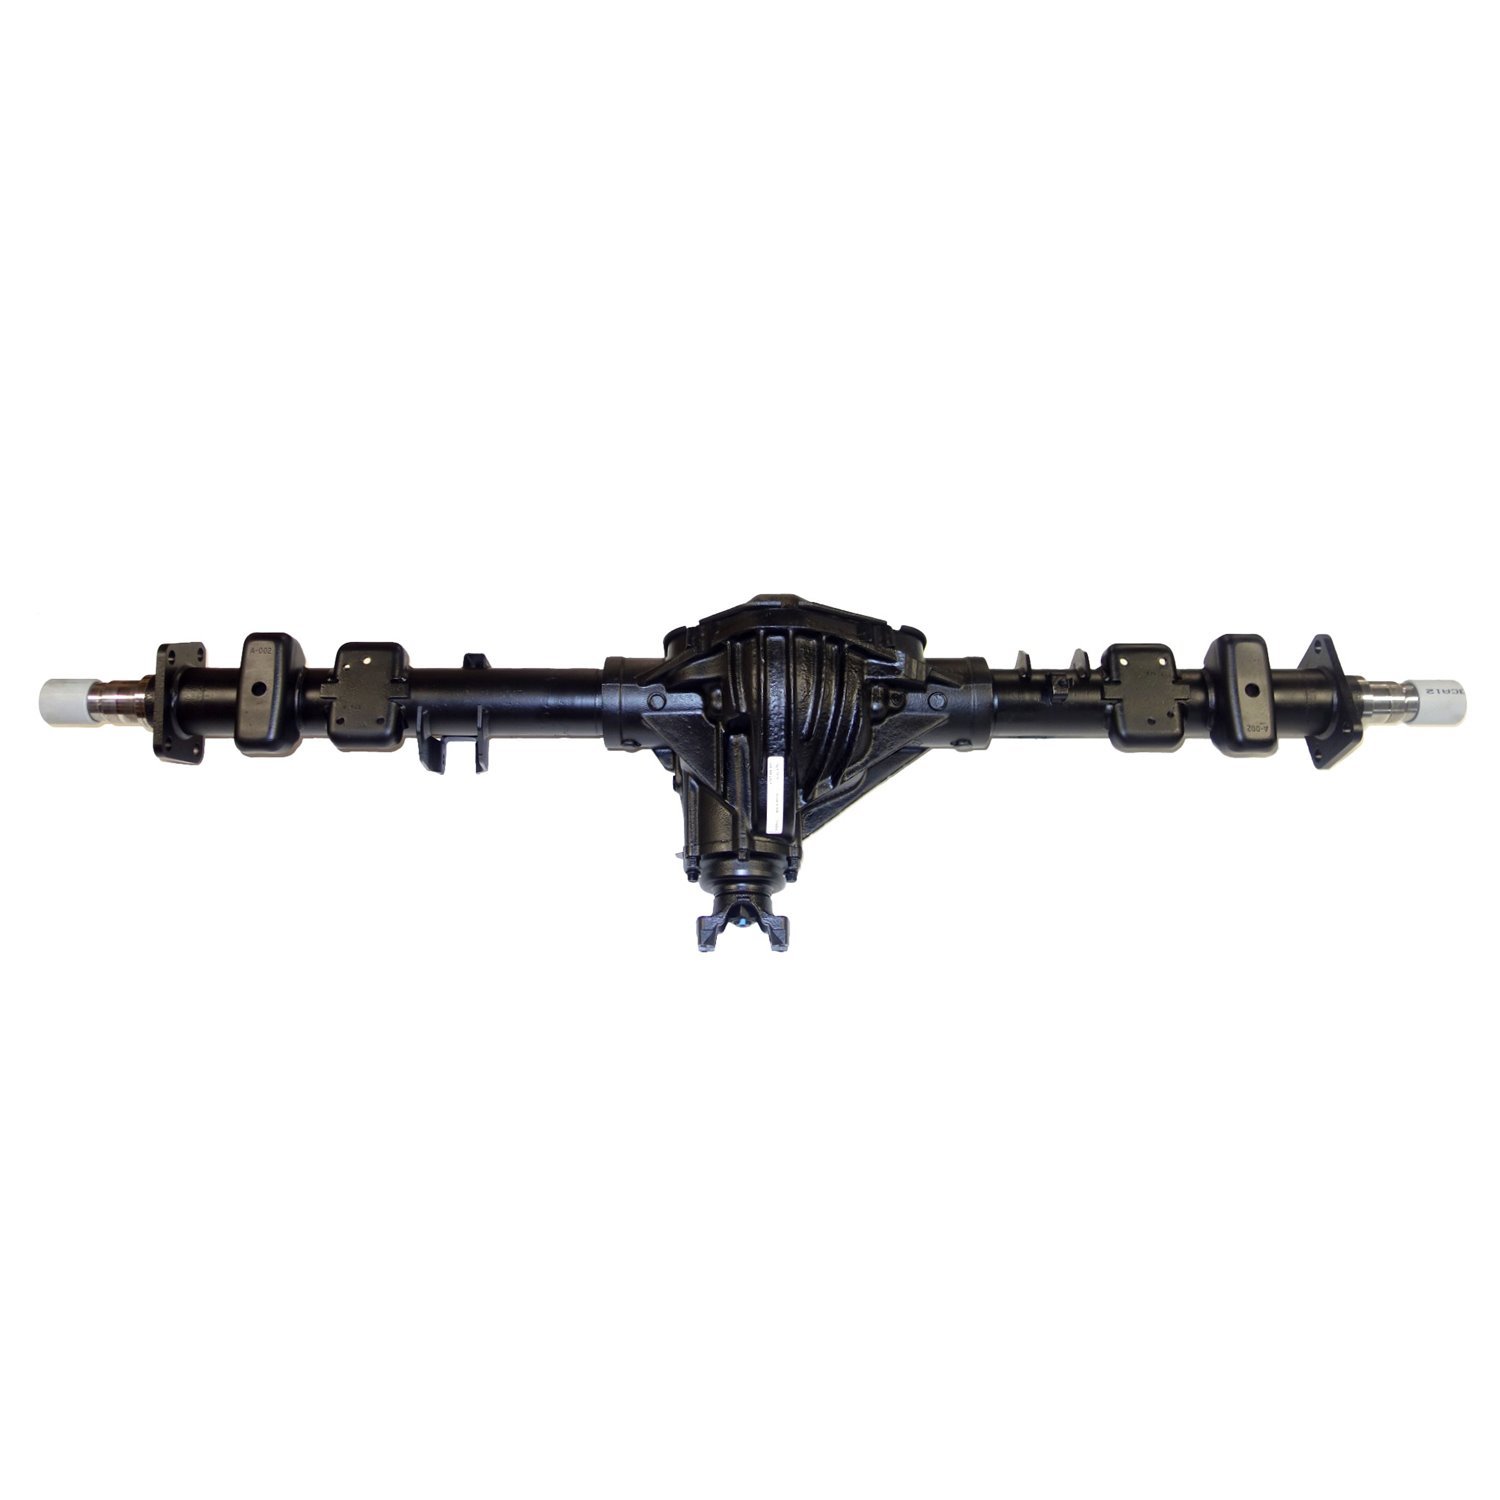 Remanufactured Axle Assy for GM 14 Bolt Truck 90-00 GM 3500, 3.73 , DRW w/o Wide Track